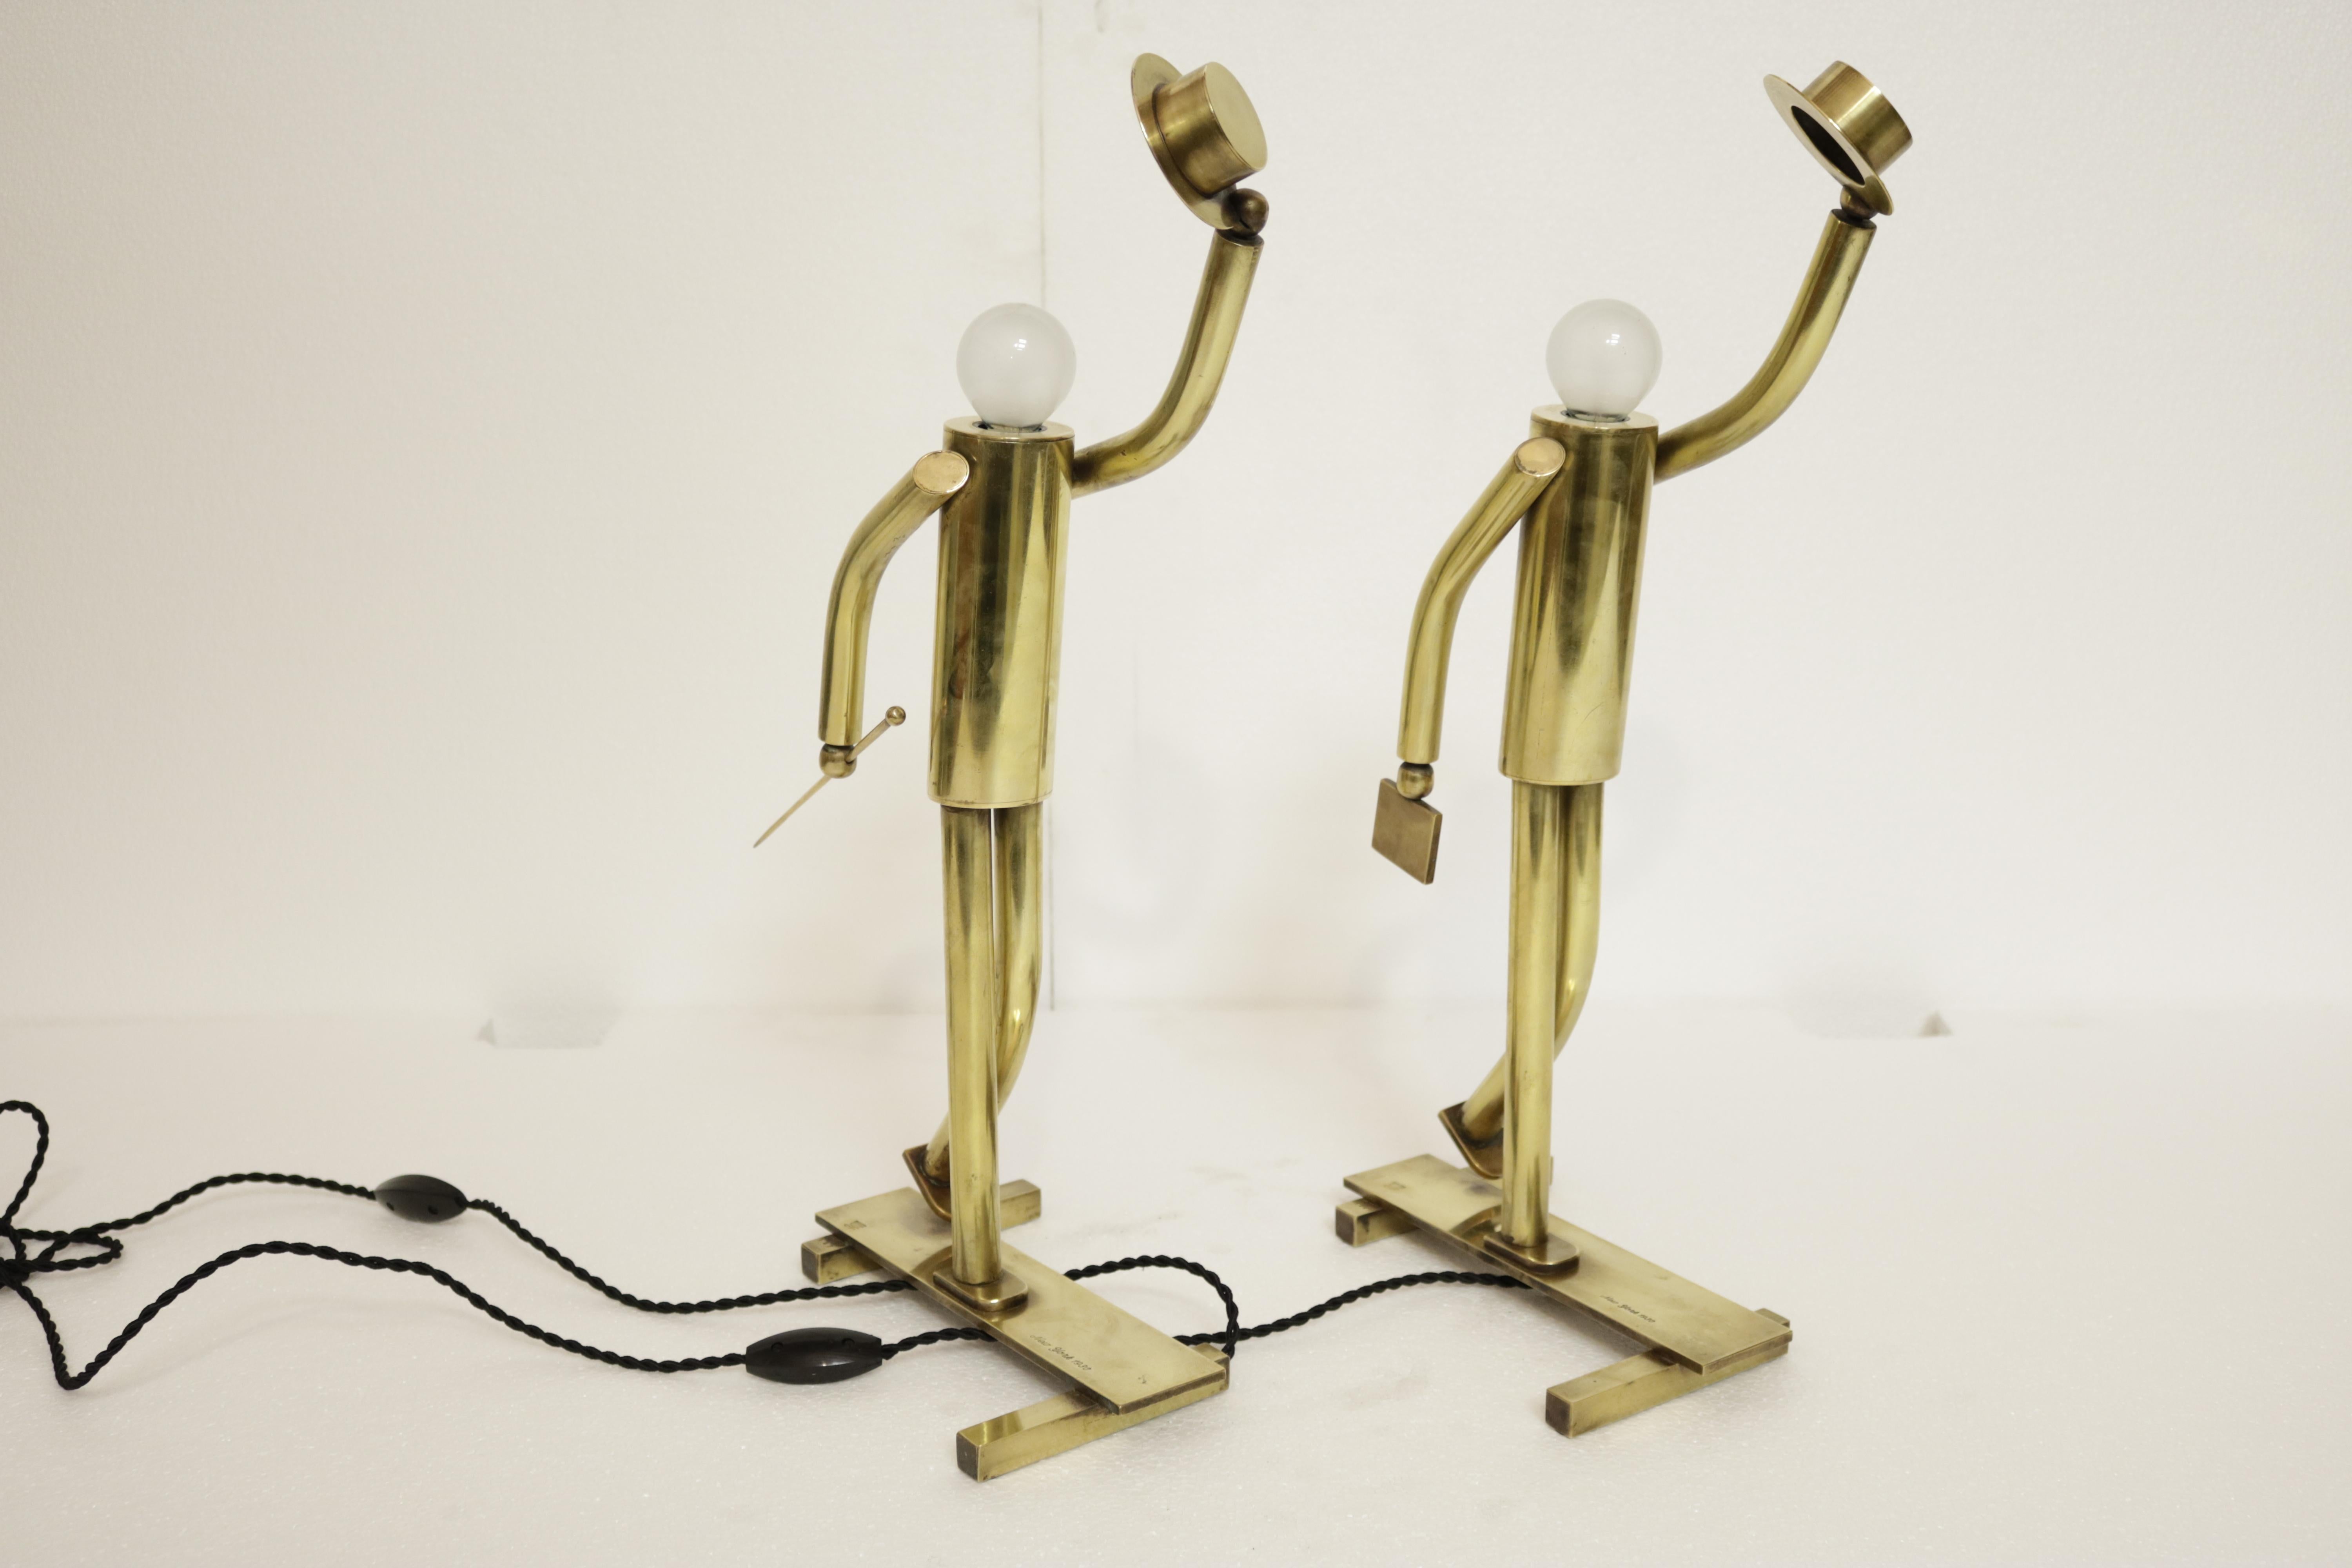 Unique pair of high-end brass lamps in the form of sphere bulb-headed figurines sporting top hats and cane or suitcase. The words 